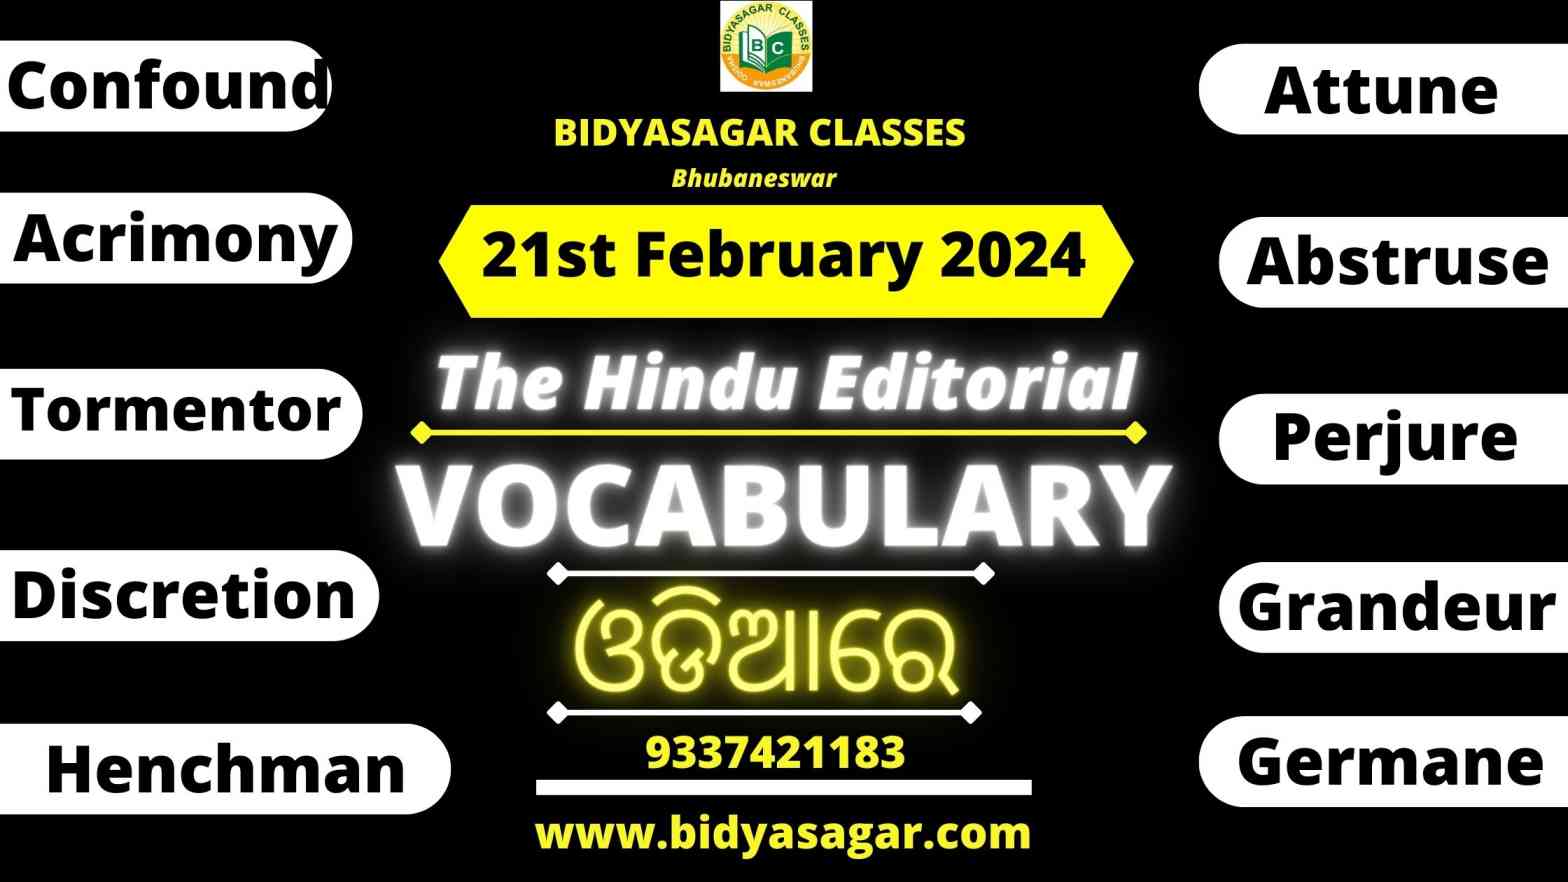 The Hindu Editorial Vocabulary of 21st February 2024